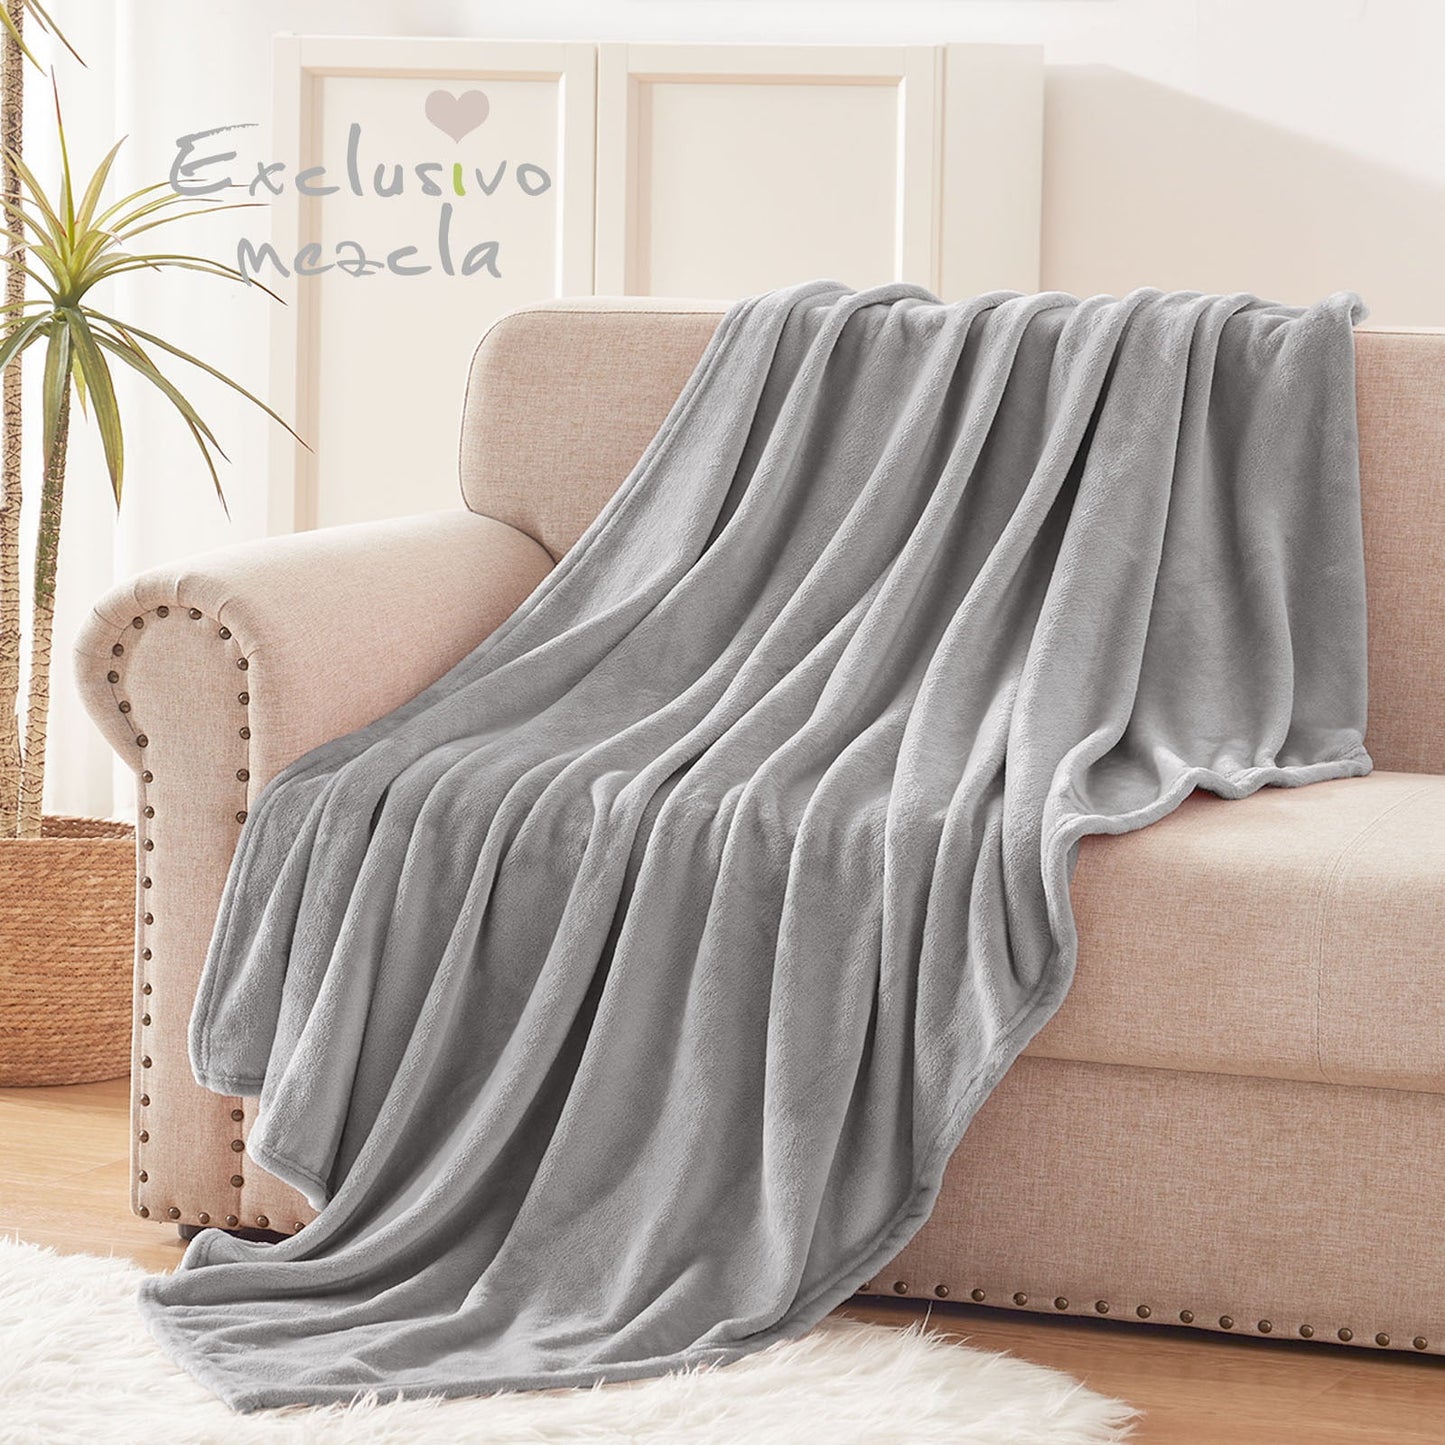 Exclusivo Mezcla Fleece Throw Blanket for Couch/Sofa/Bed,Plush Soft Blankets and Throws,Lightweight and Cozy-50" x 60" (Light Grey )